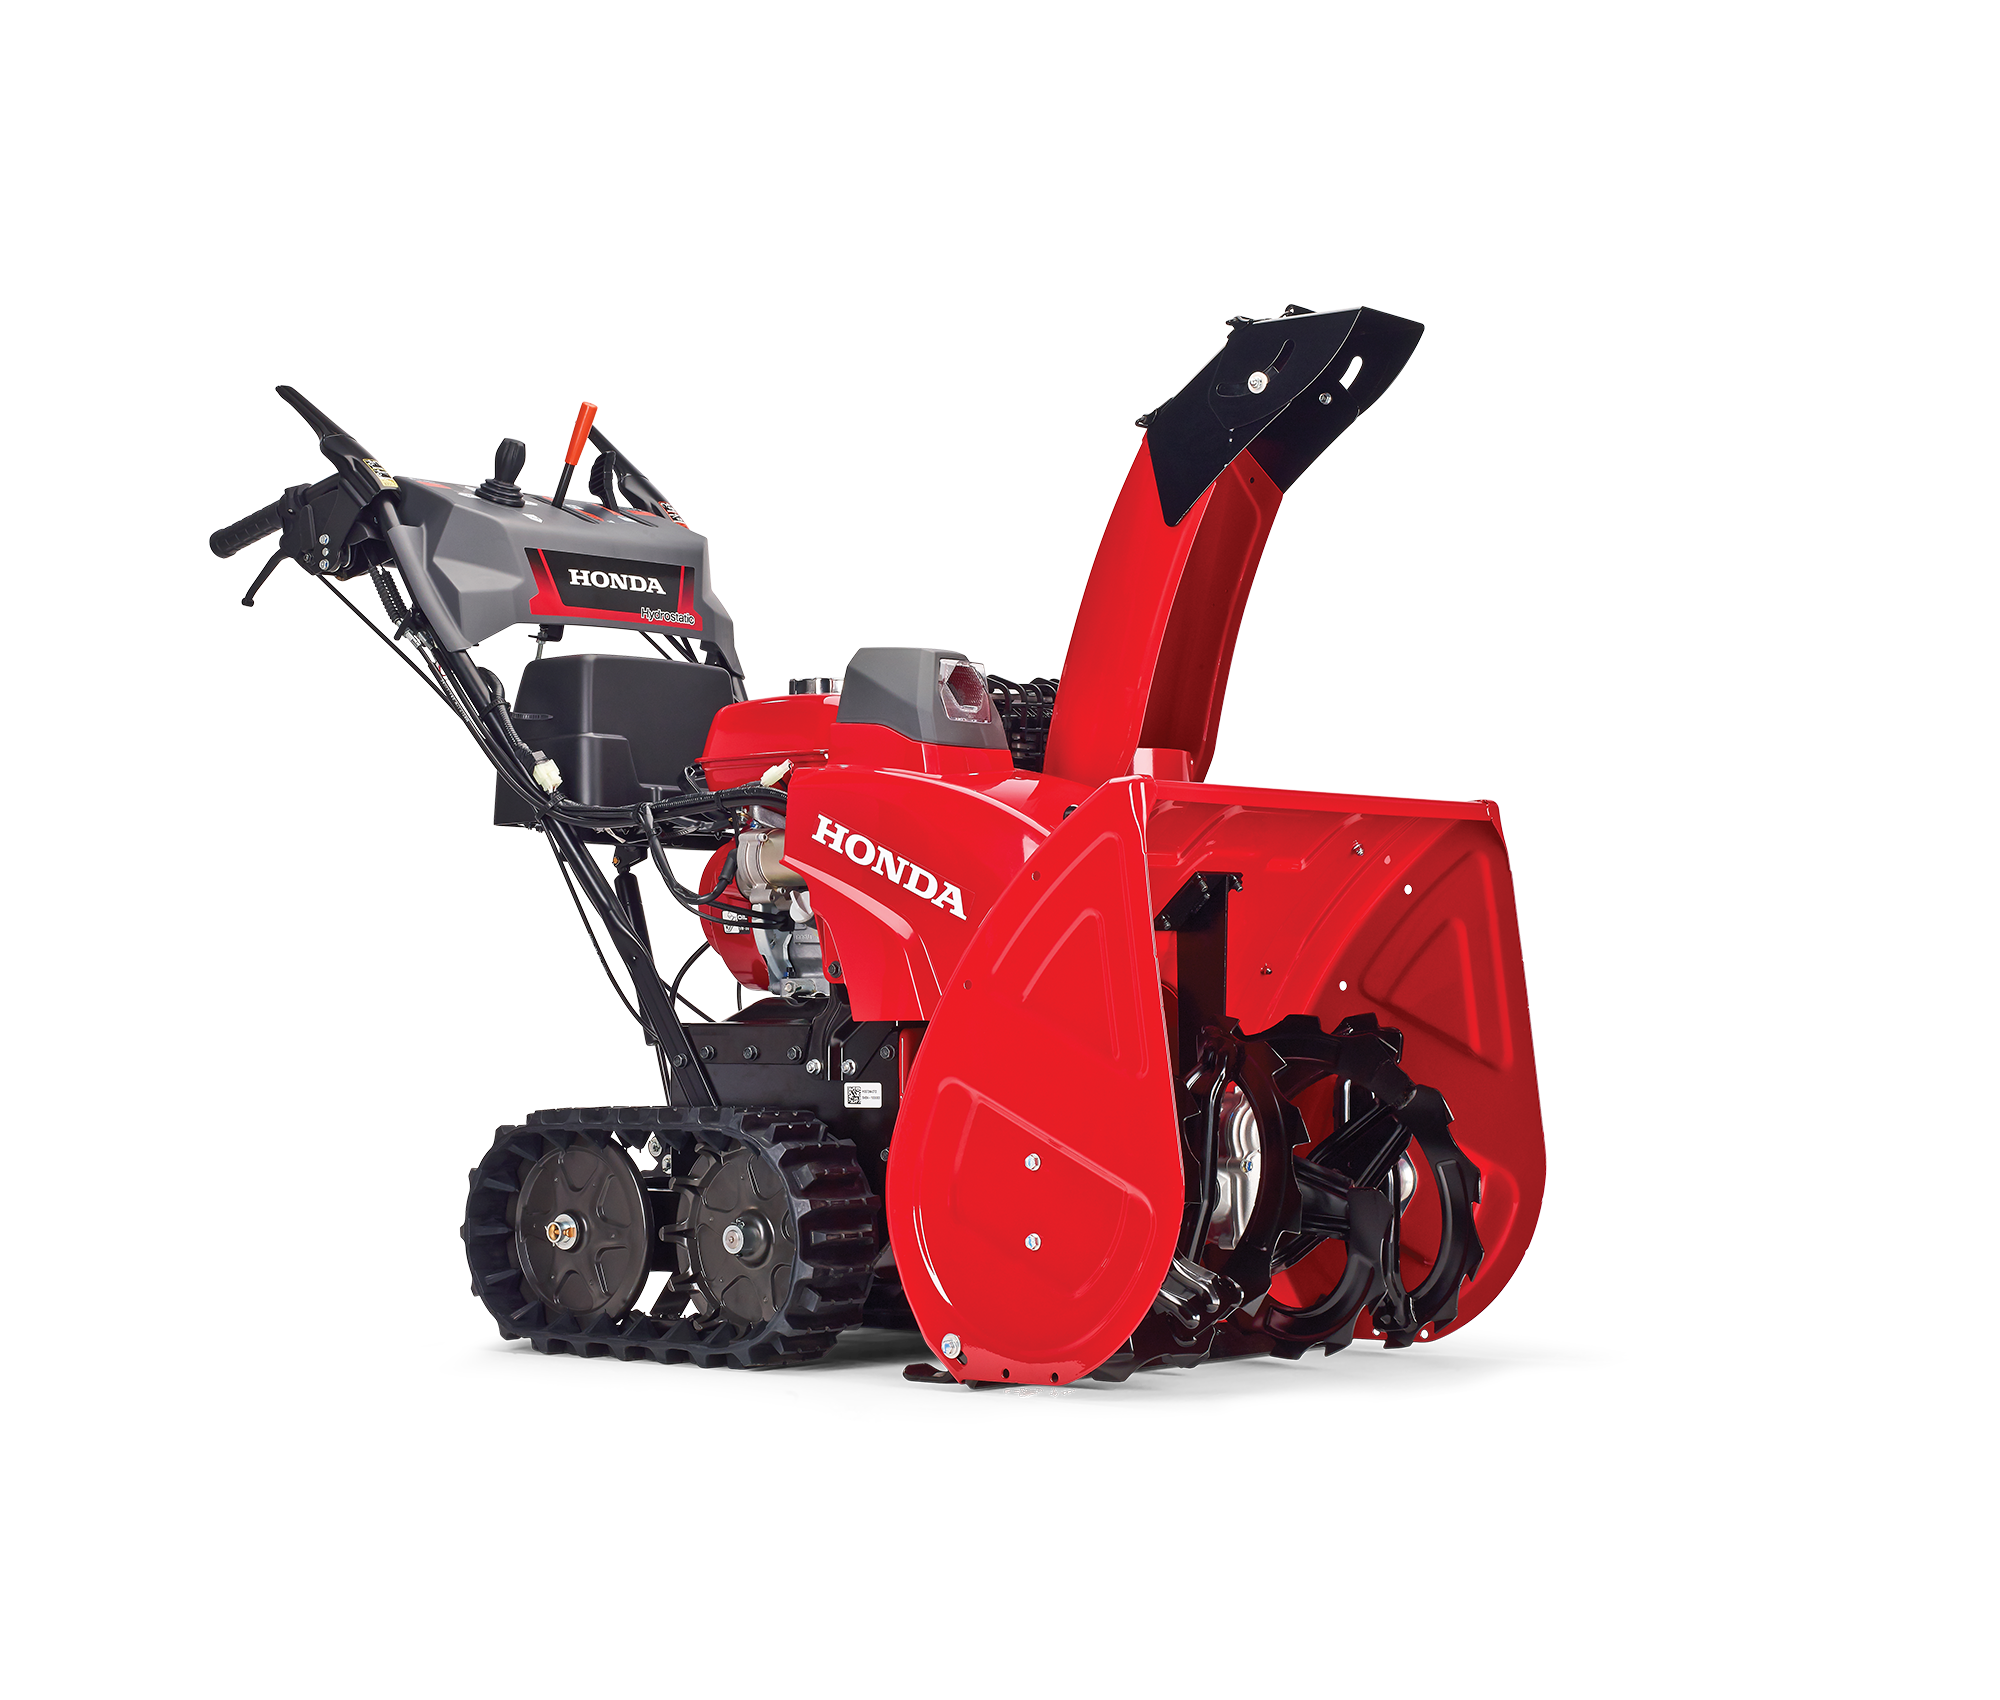 Image of the 24" Track-Drive ES Snowblower